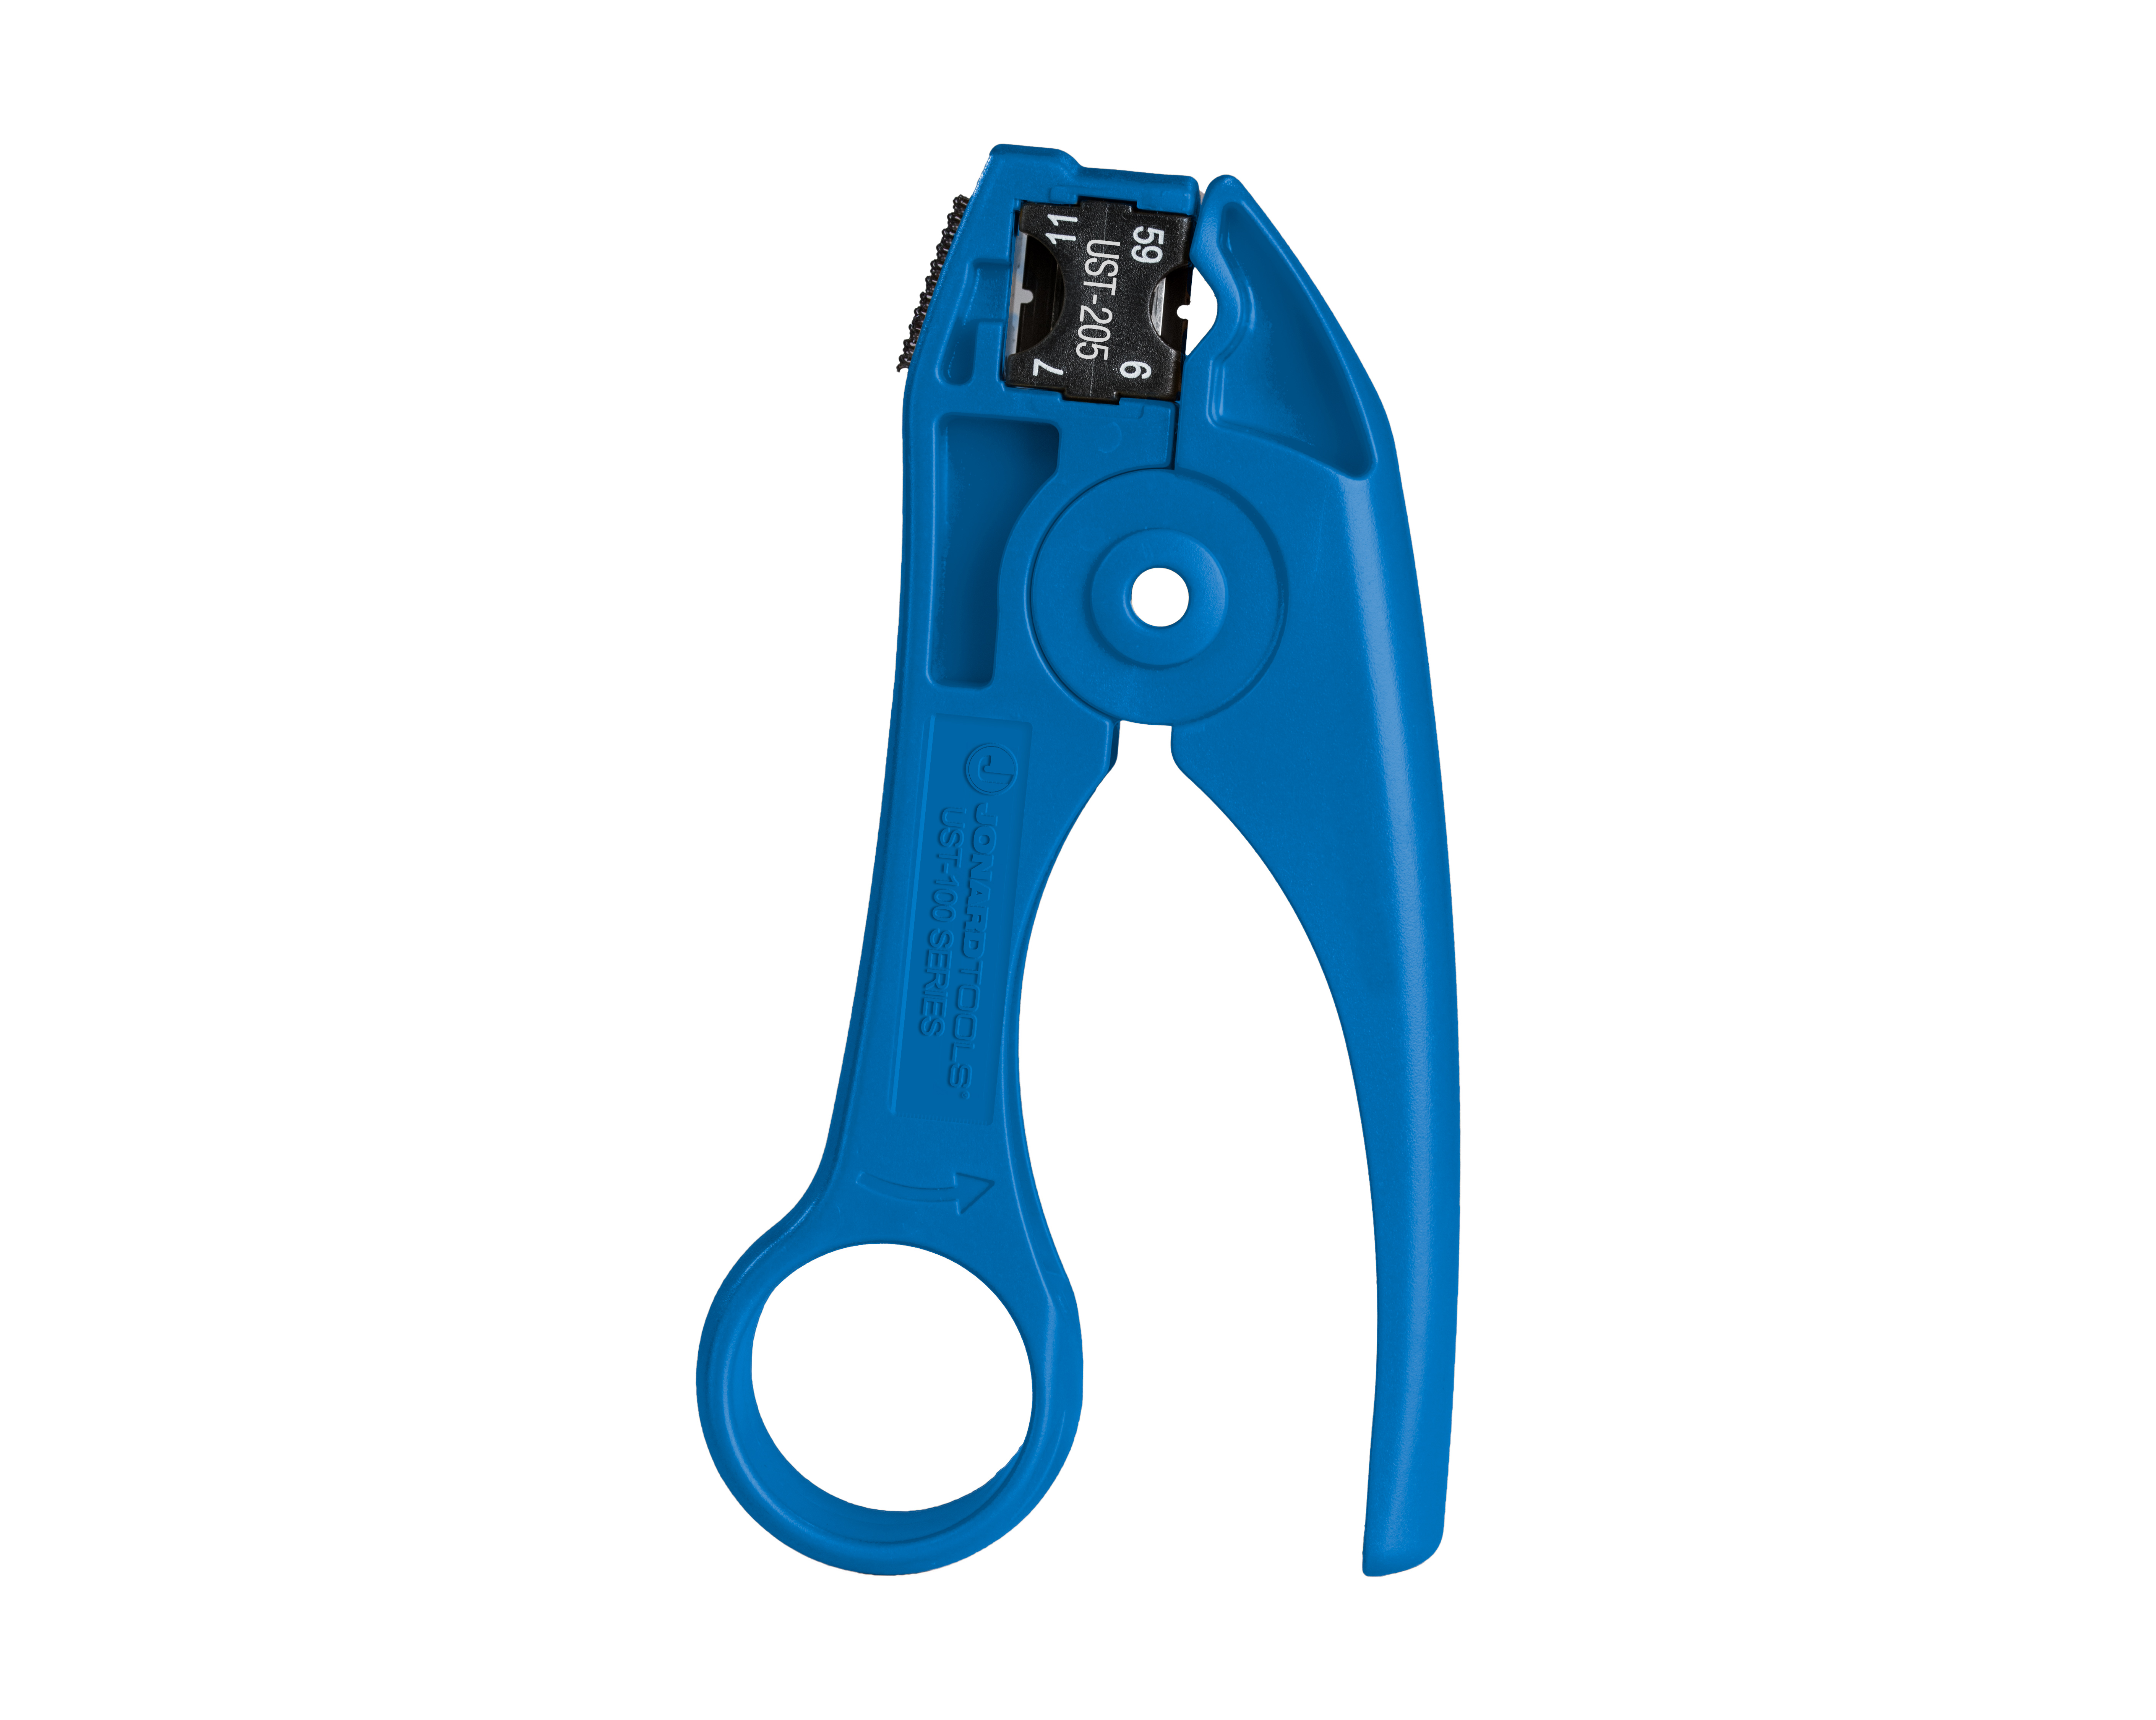 Cable Stripper For RG59 RG6 RG11 Coaxial Wire Coax Stripping Tool Kits H.dr 